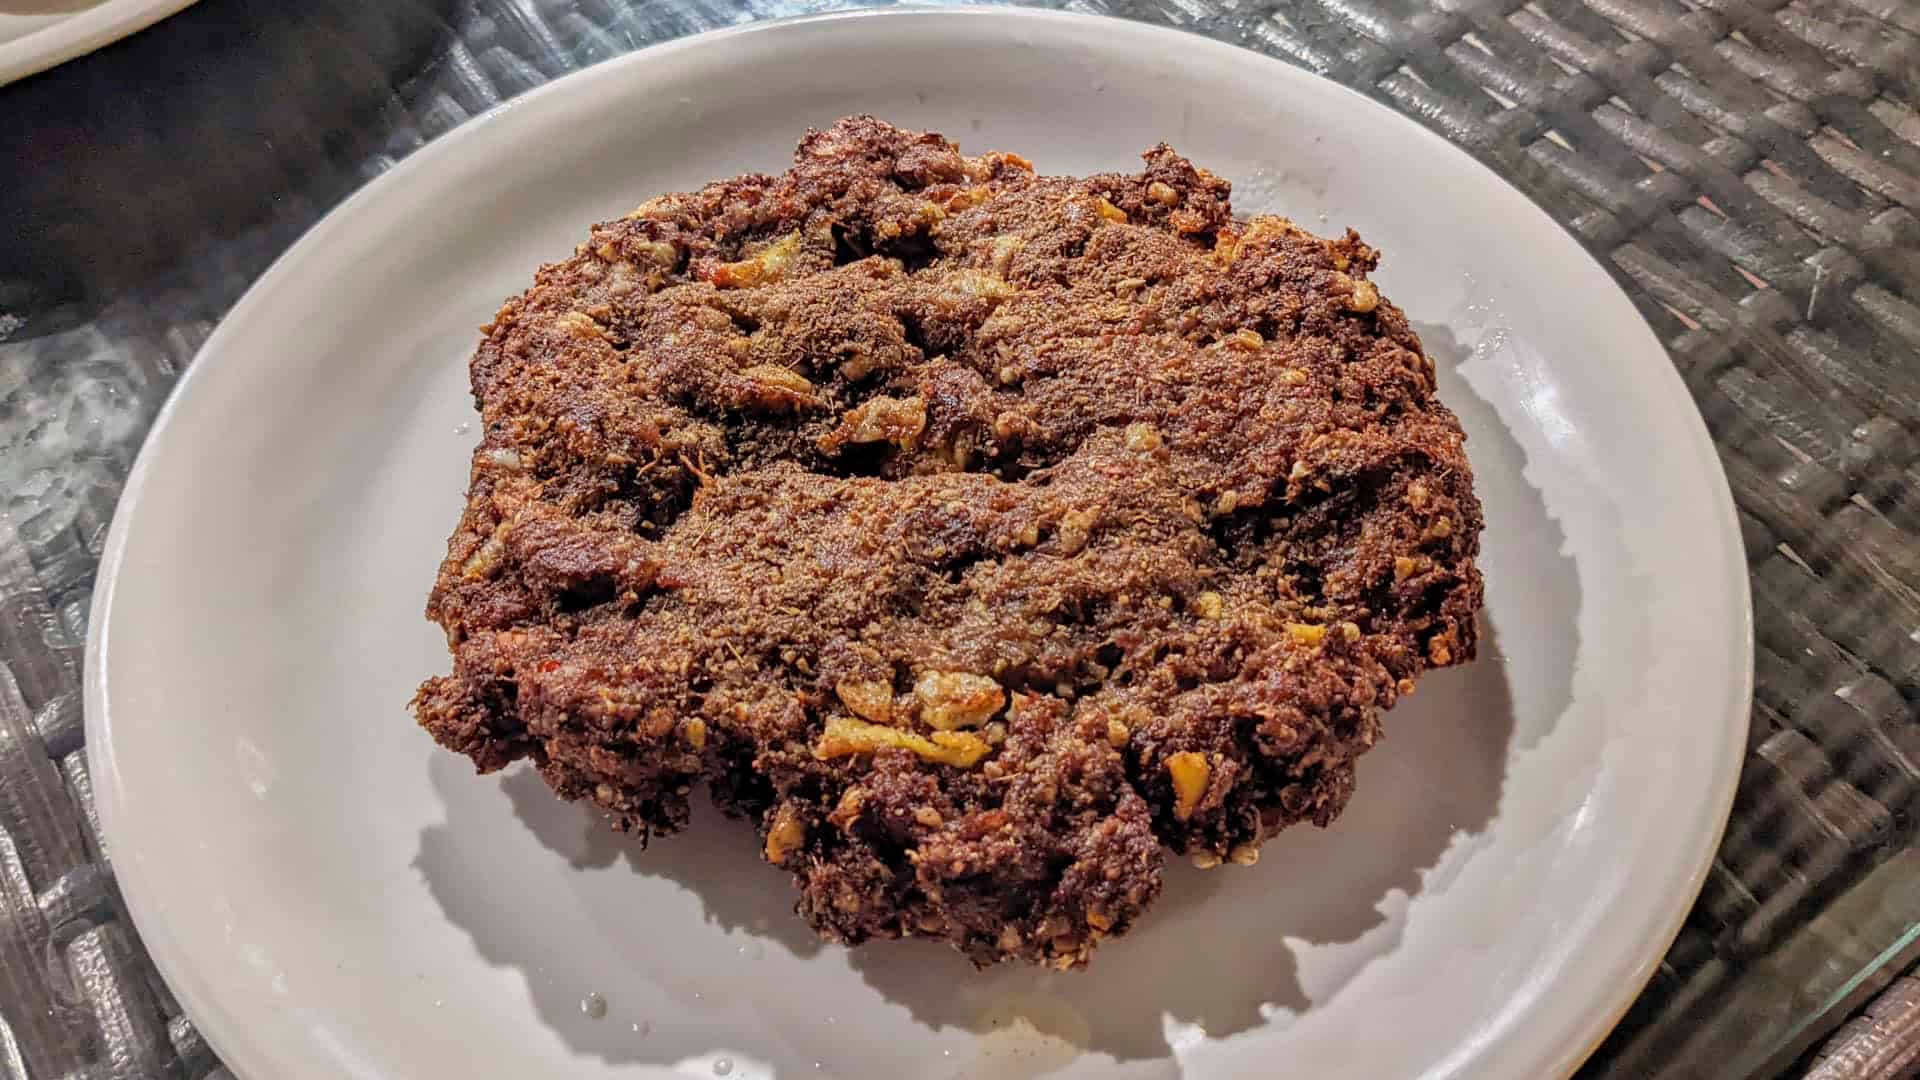 Chapli kabab are thin ground beef patties made with aromatics and spices. Unlike your usual grilled kebabs, Chapli Kabab are fried so they’re browned and crisp on the outside whilst staying tender on the inside. Presented in this shot on a white plate.